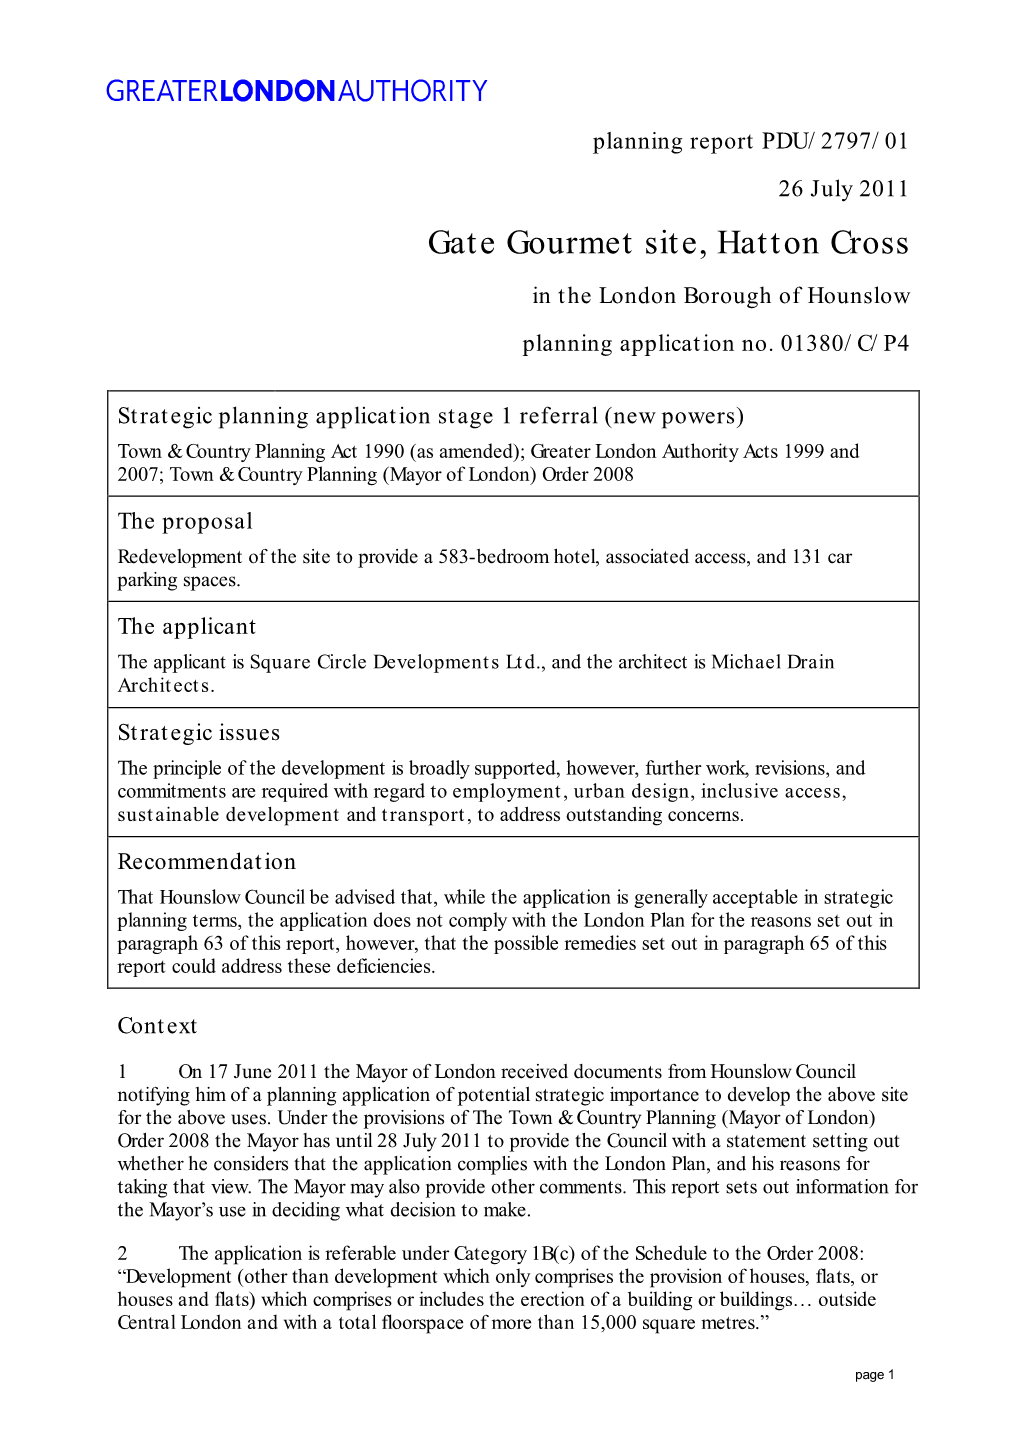 Gate Gourmet Site, Hatton Cross in the London Borough of Hounslow Planning Application No